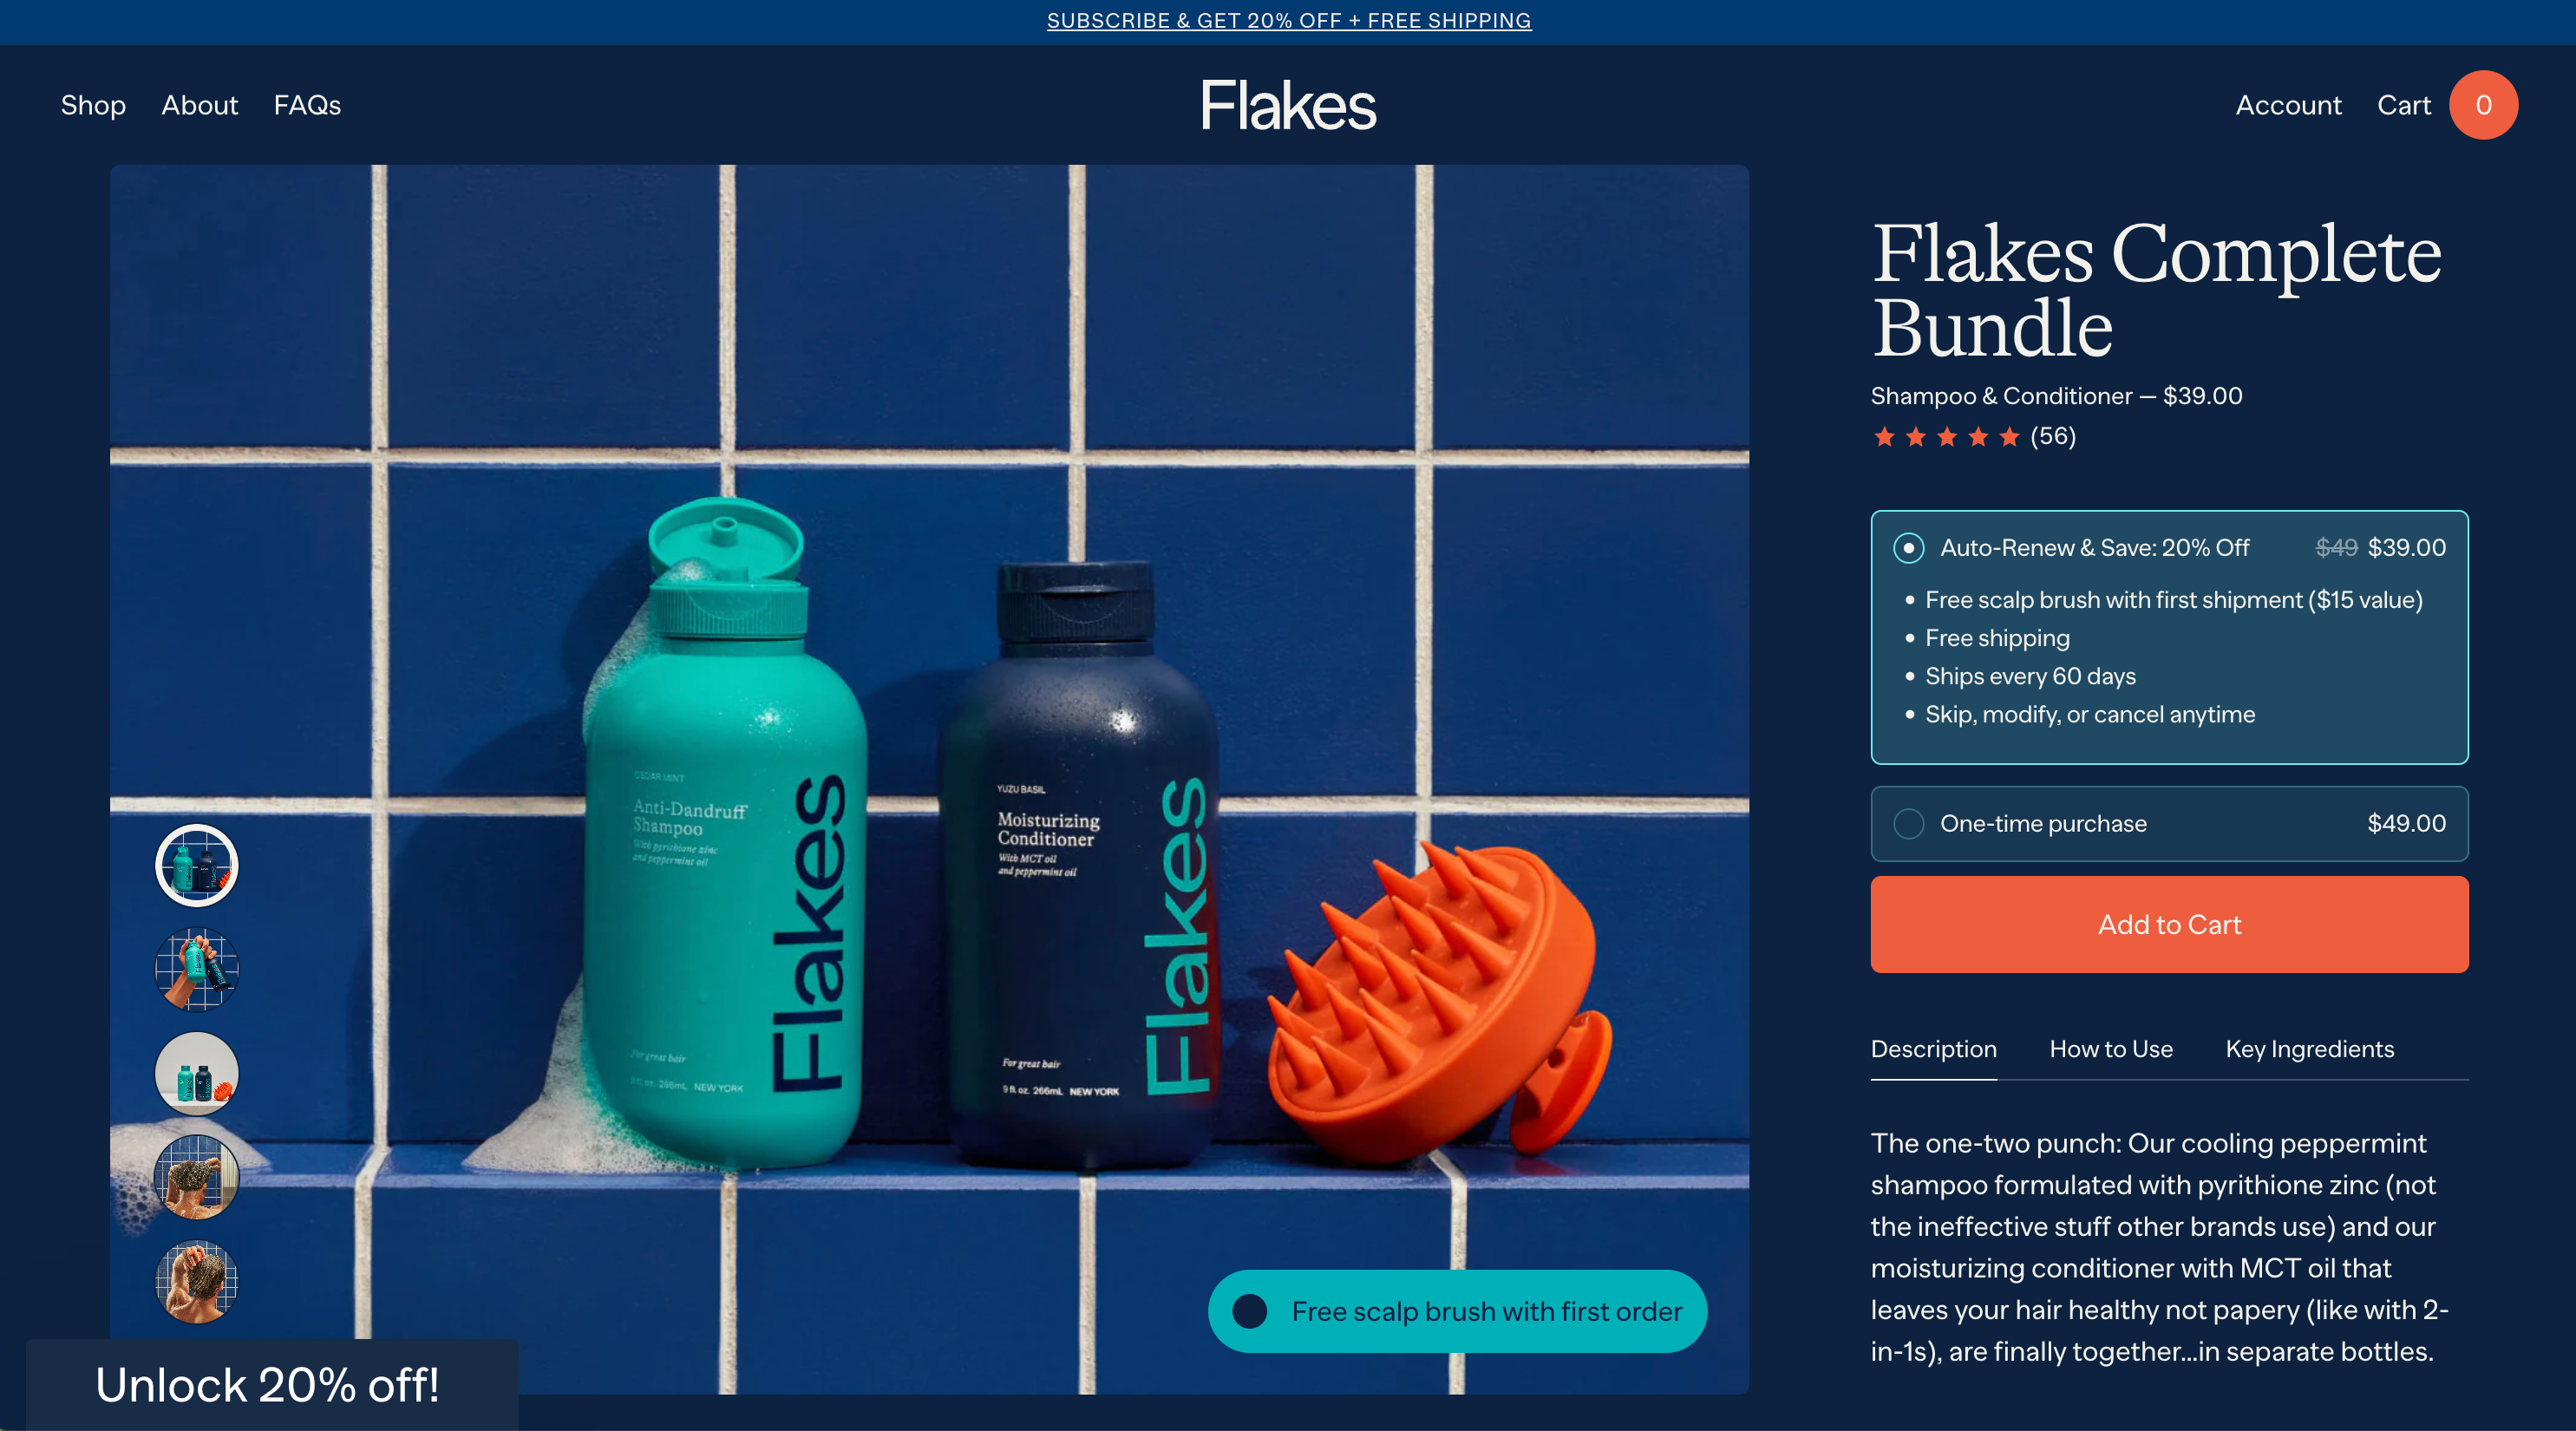 A product page from Flakes' ecommerce website